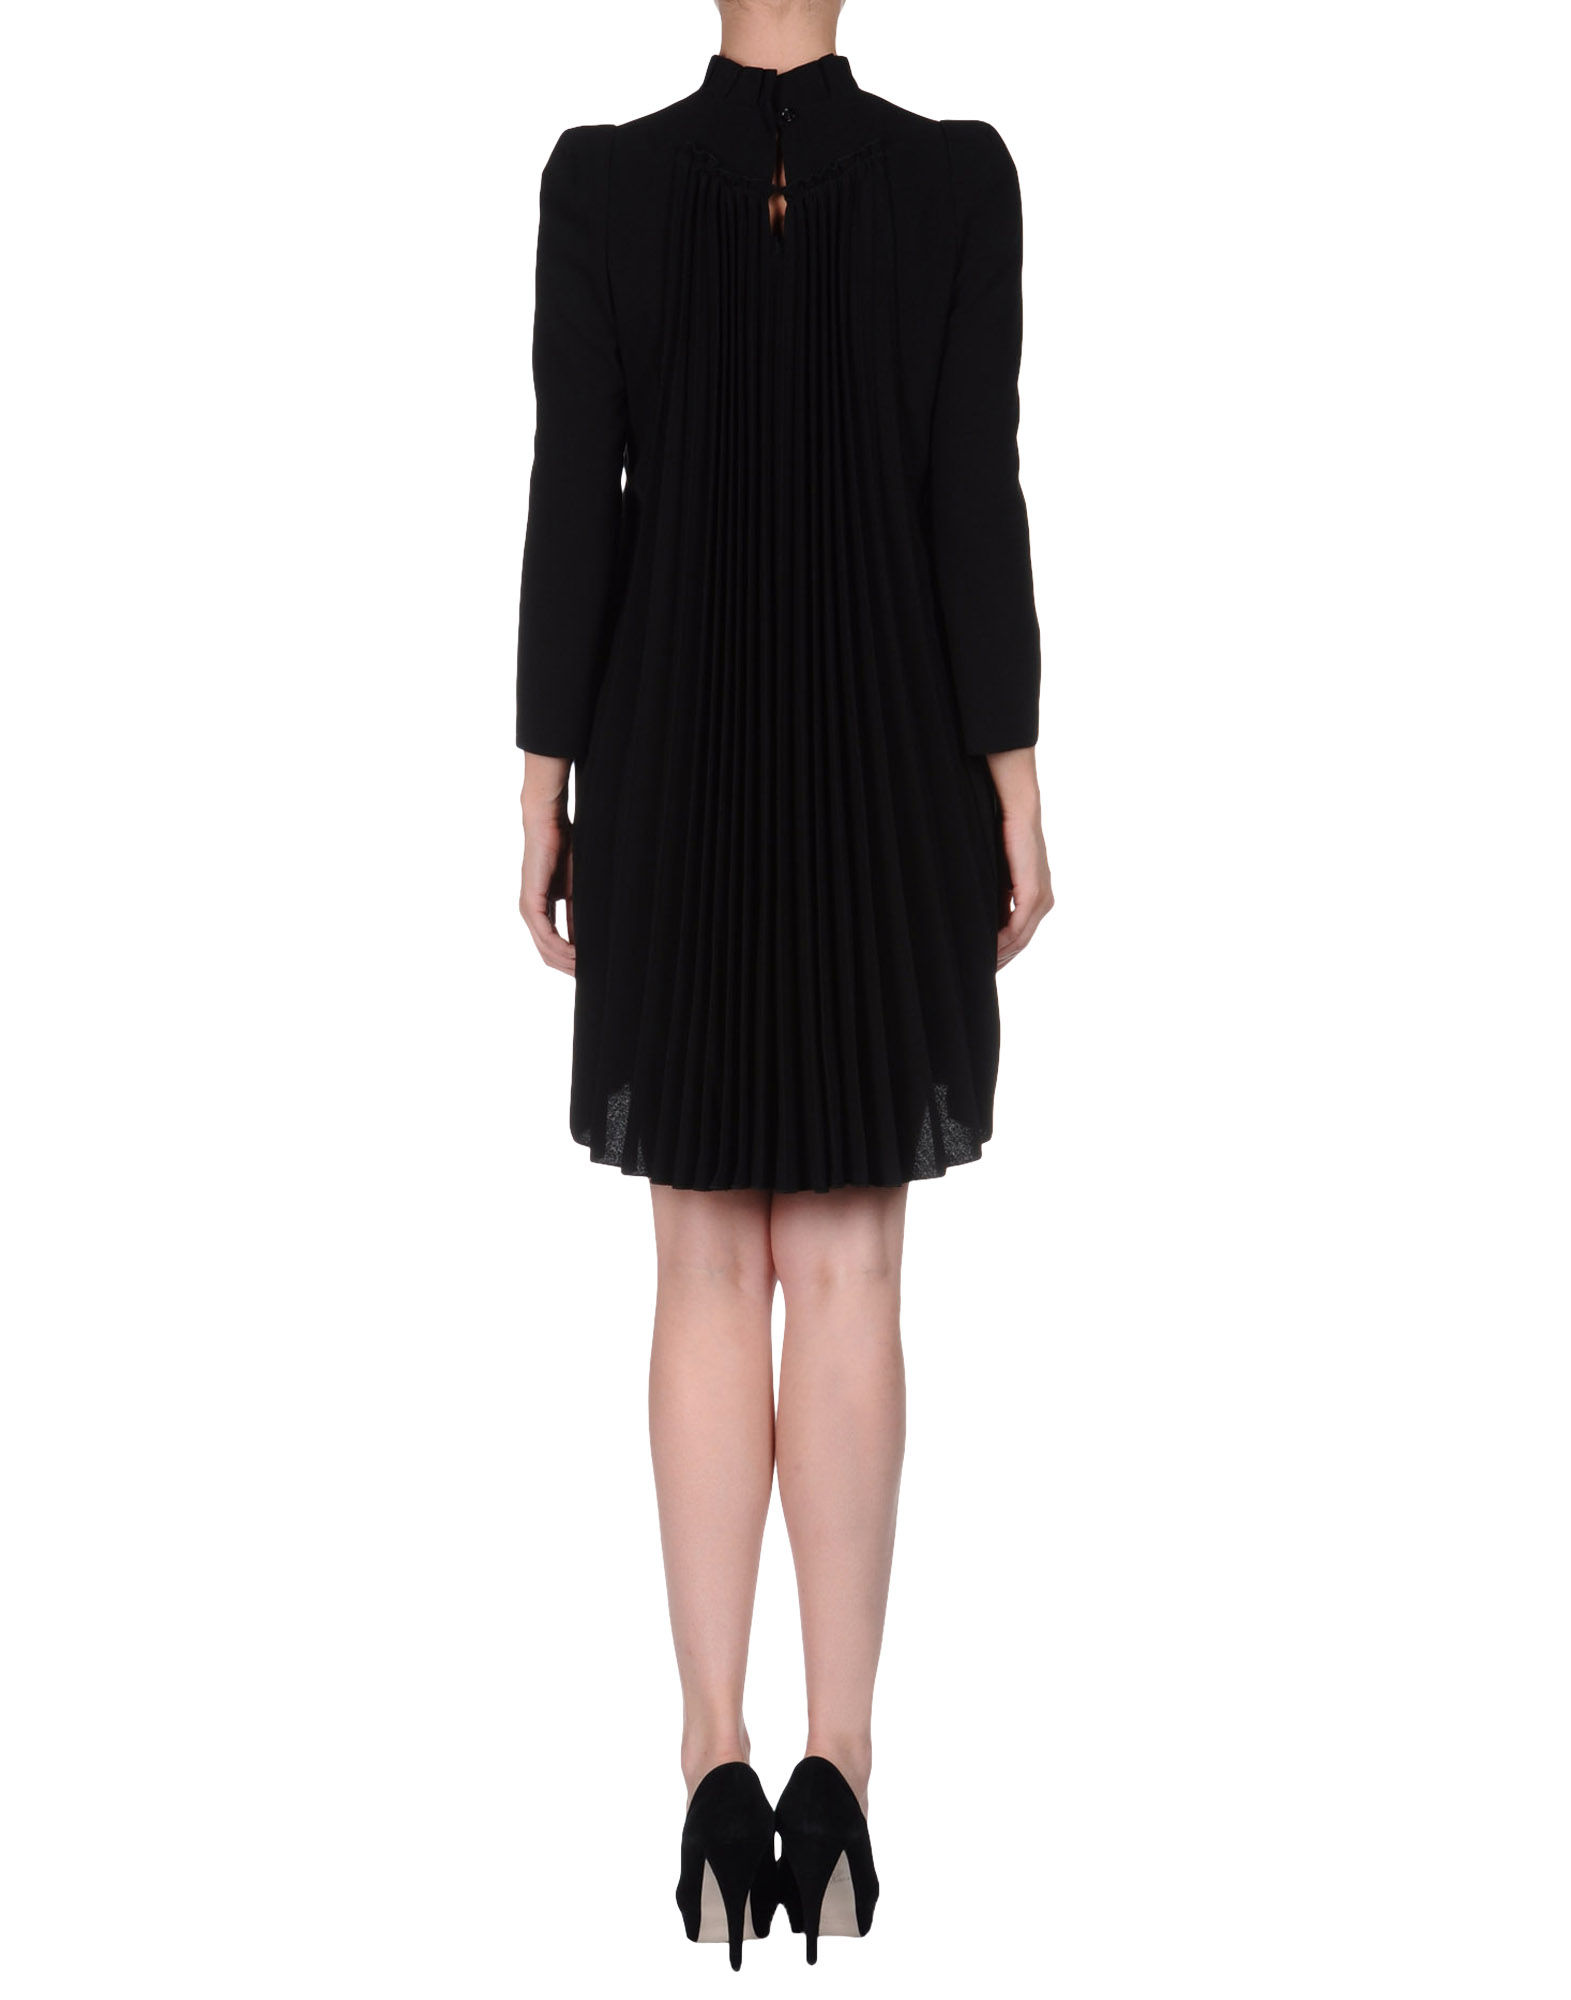 Lyst - See by chloé Short Dress in Black